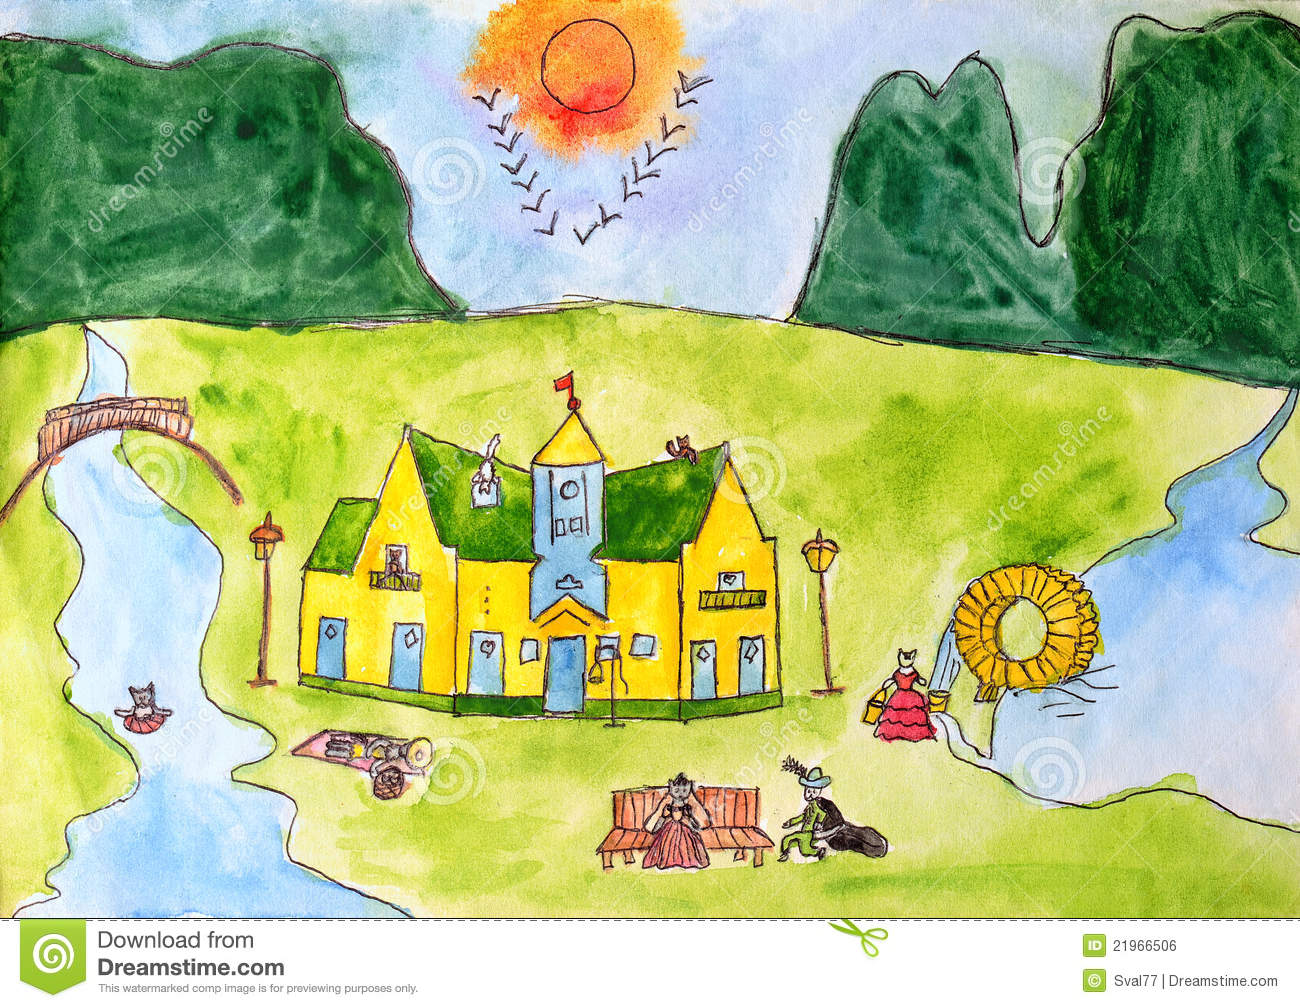 Watercolor Painting  Cat S House Royalty Free Stock Image   Image    